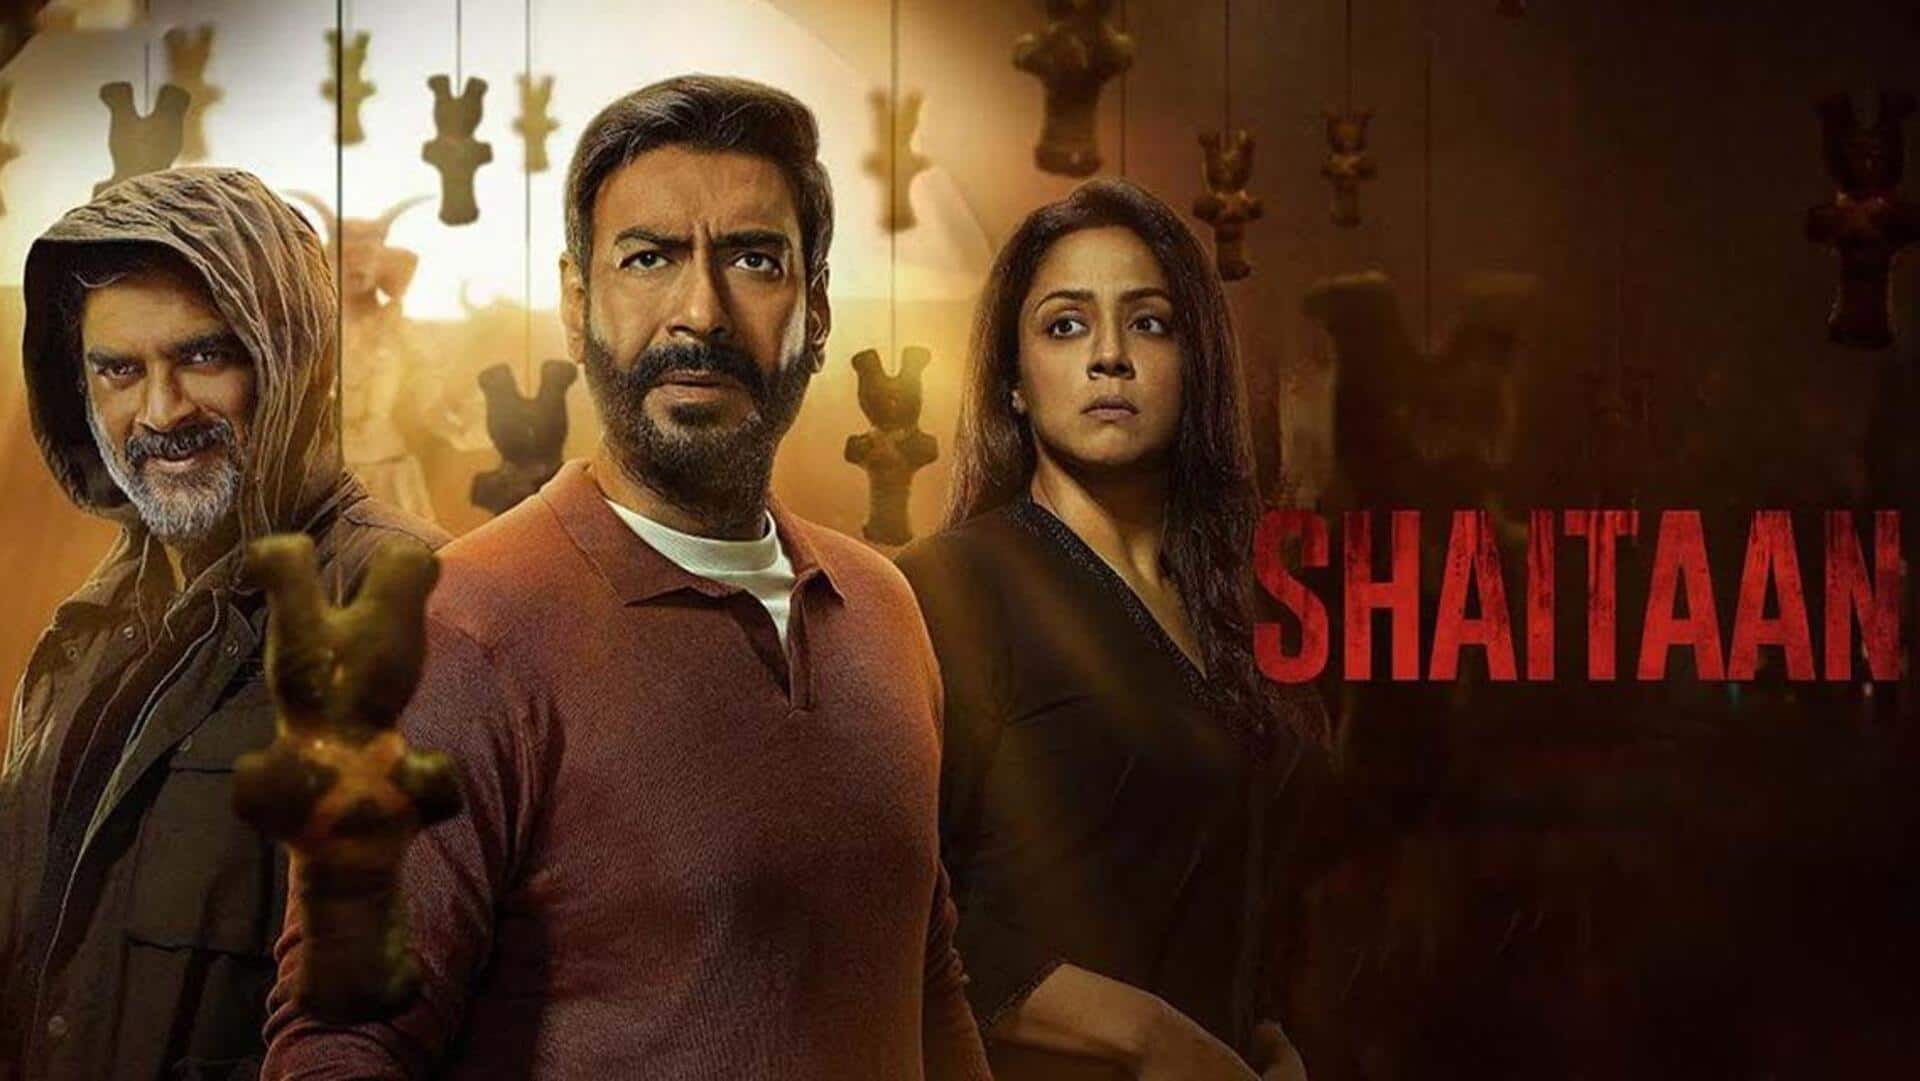 Box office collection: 'Shaitaan' holds fort strong over weekend